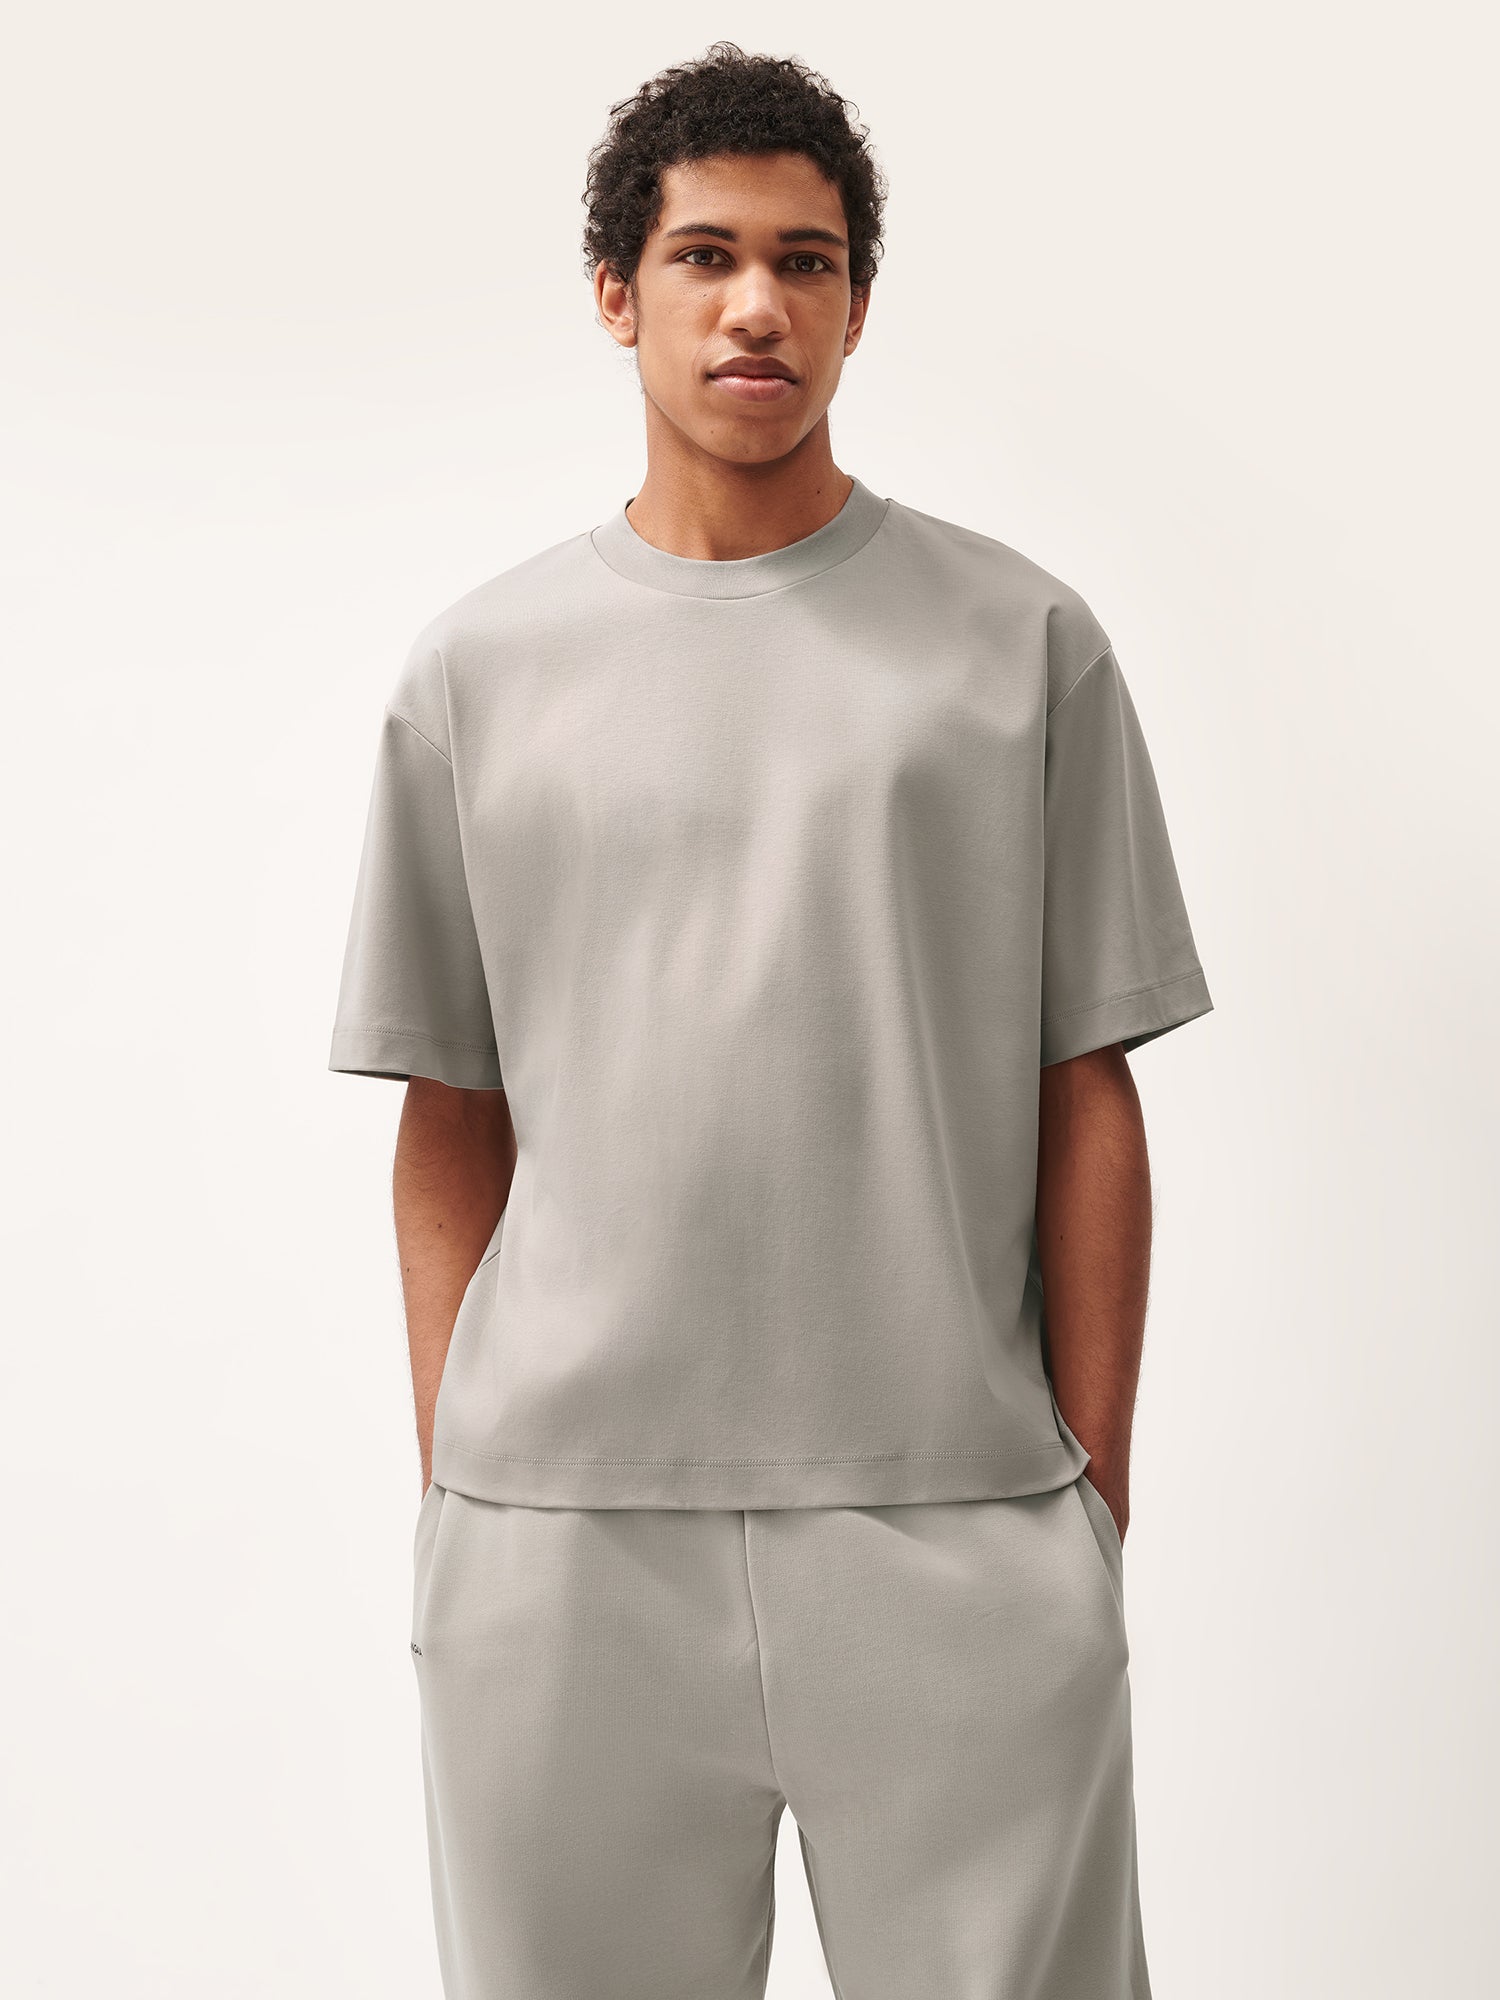 DNA_Oversized_T-Shirt_Stone_Male-1